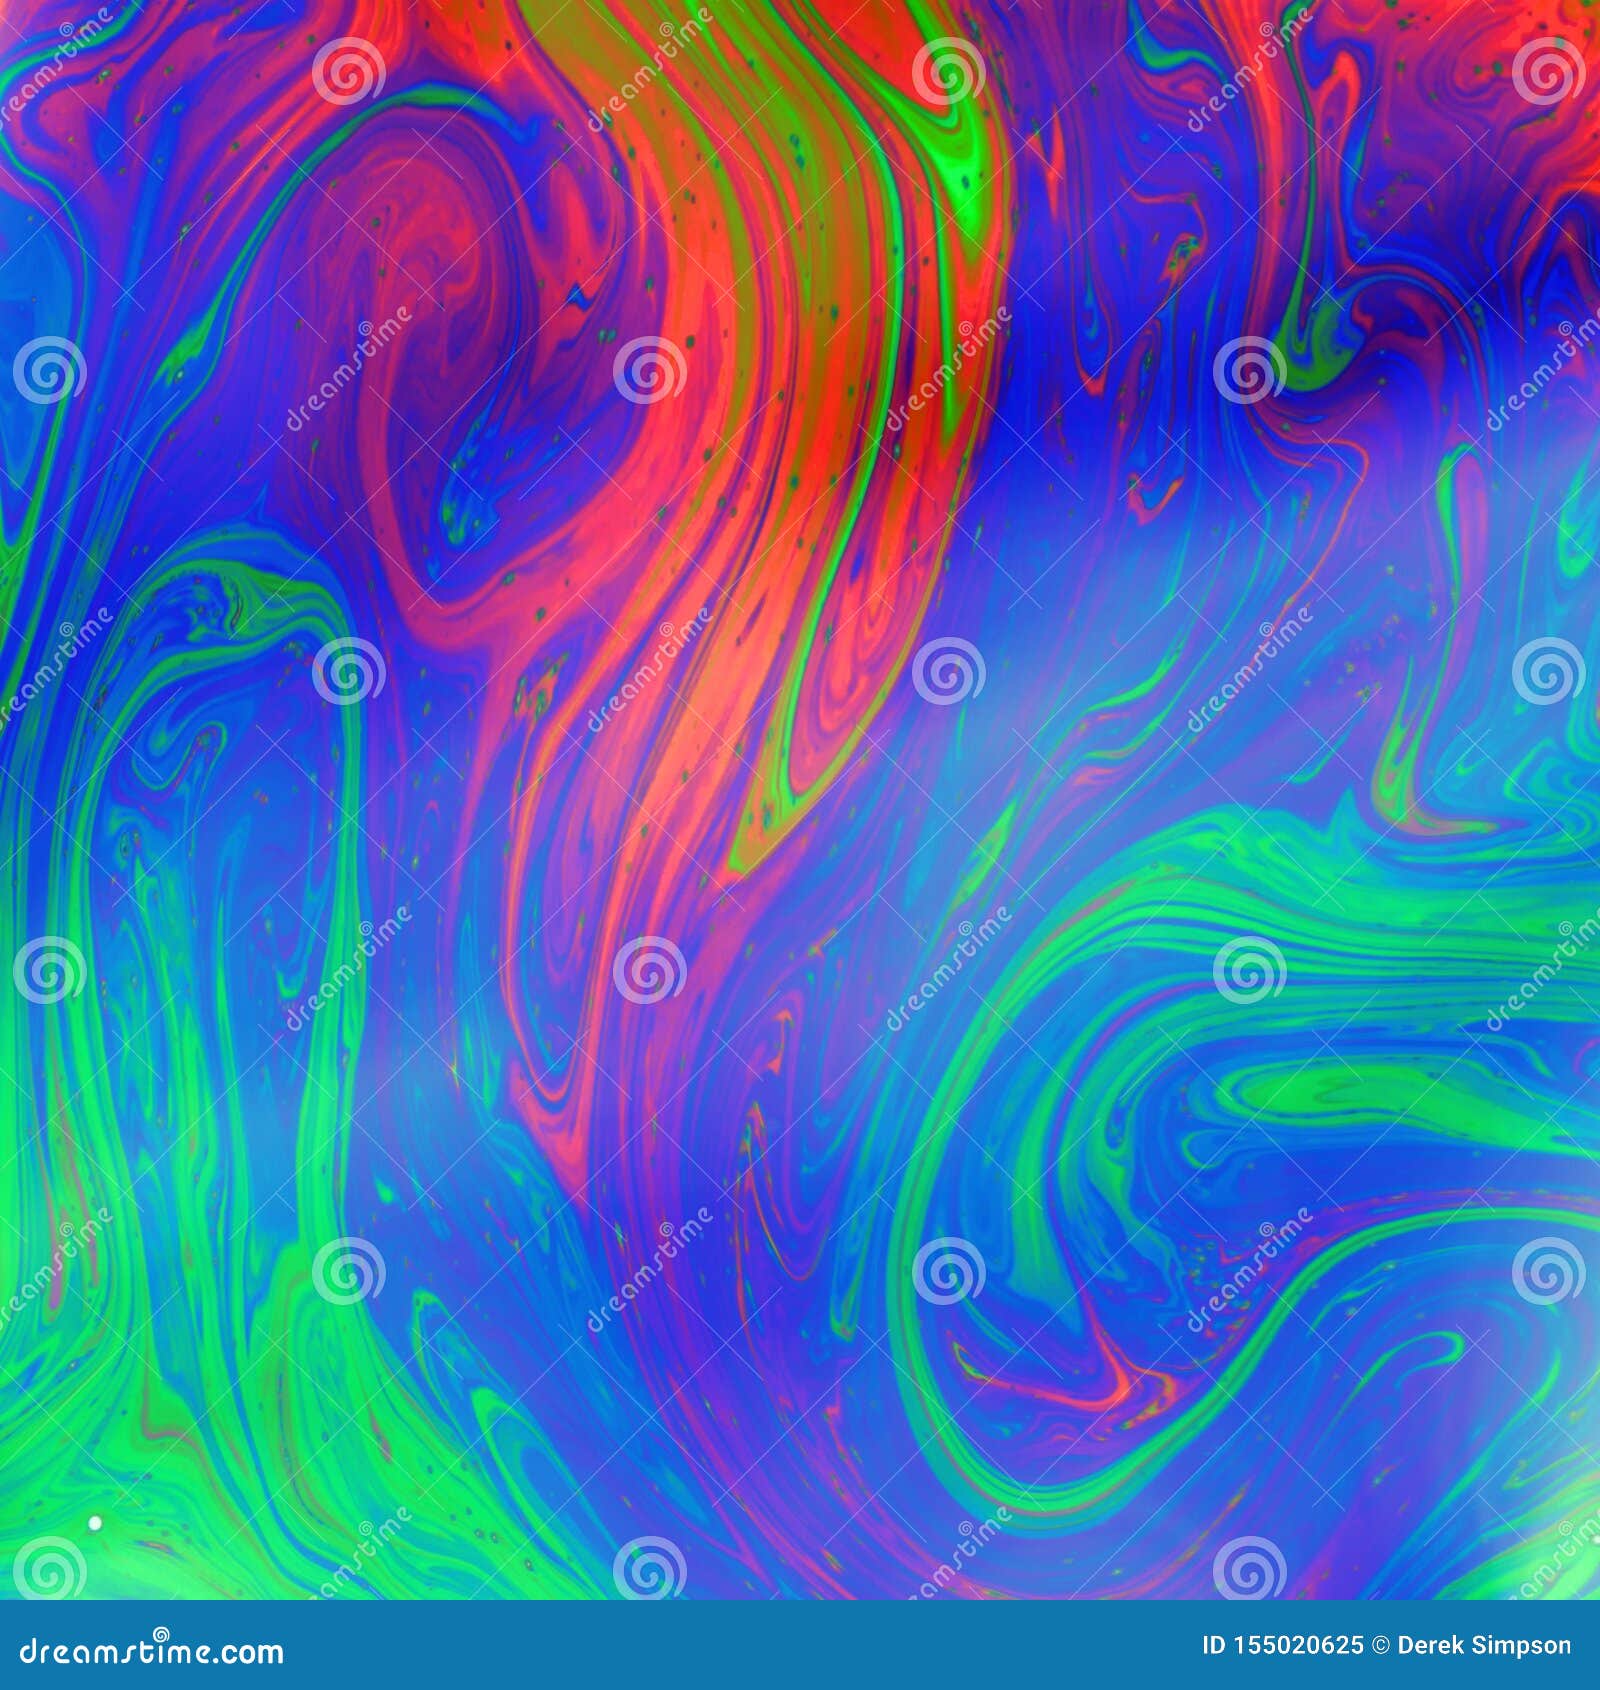 Colorful, Trippy Psychedelic Abstract Background In Red ...